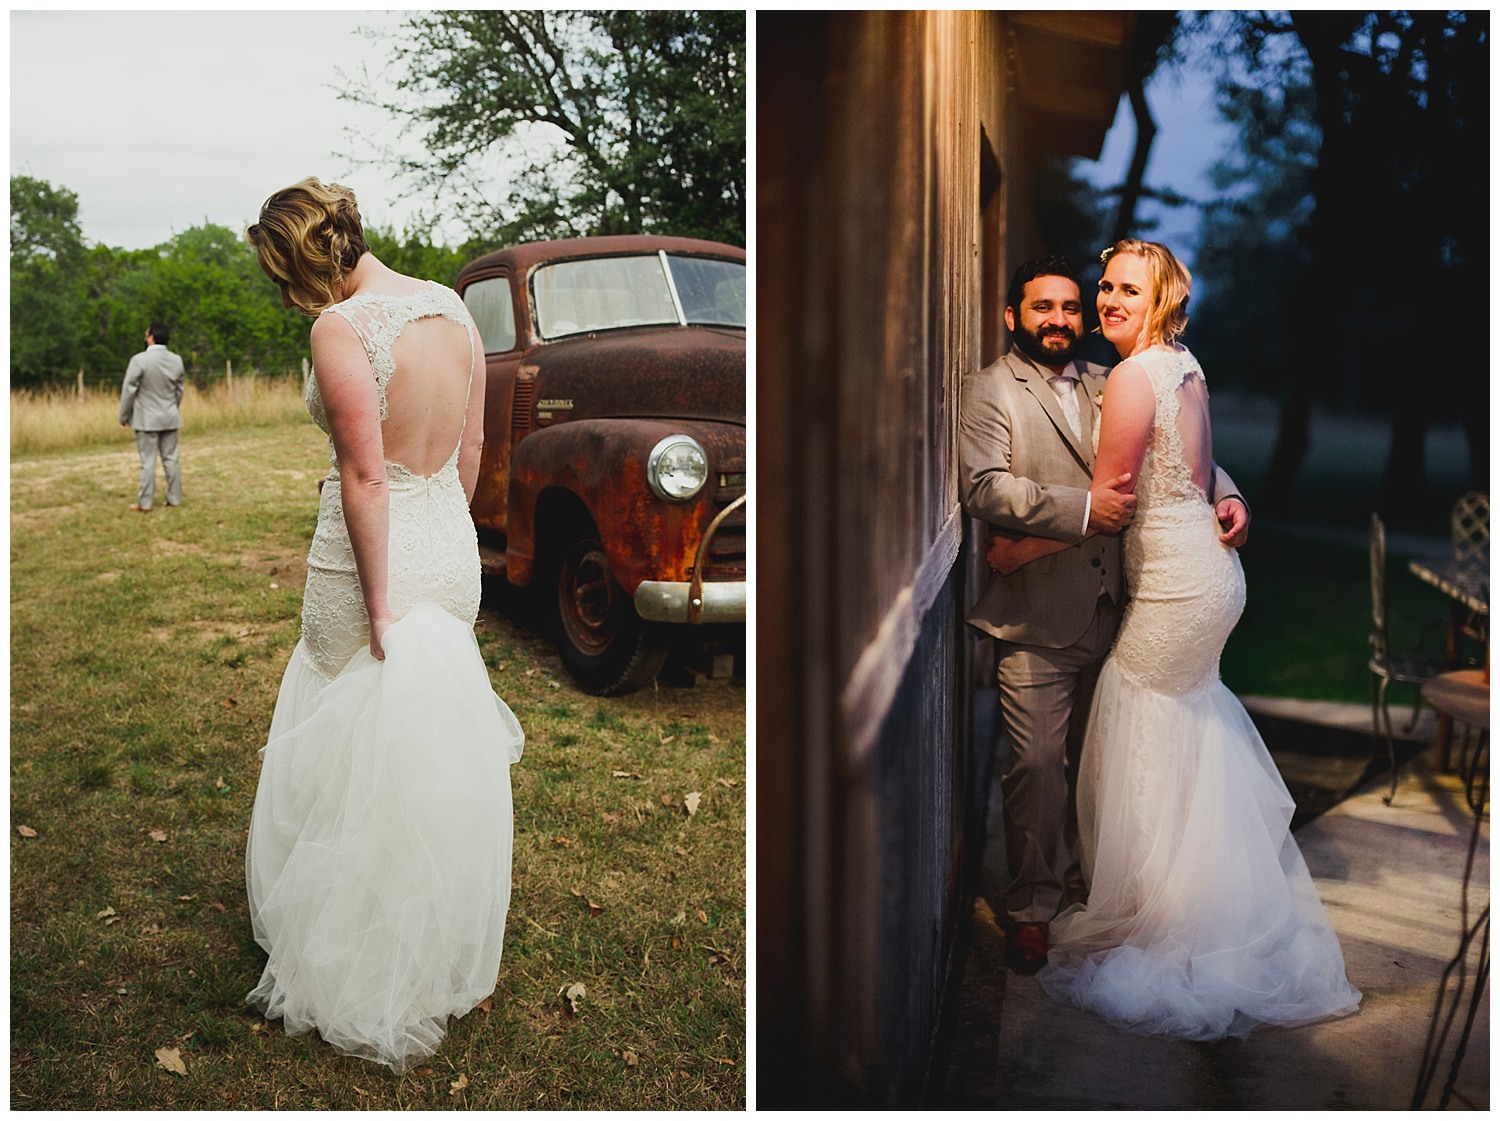 Couple pose and bride walks toward groom for the first look RUSTIC BARN WEDDING at VISTA WEST RANCH DRIPPING SPRINGS _ BRANDI + AJ-55